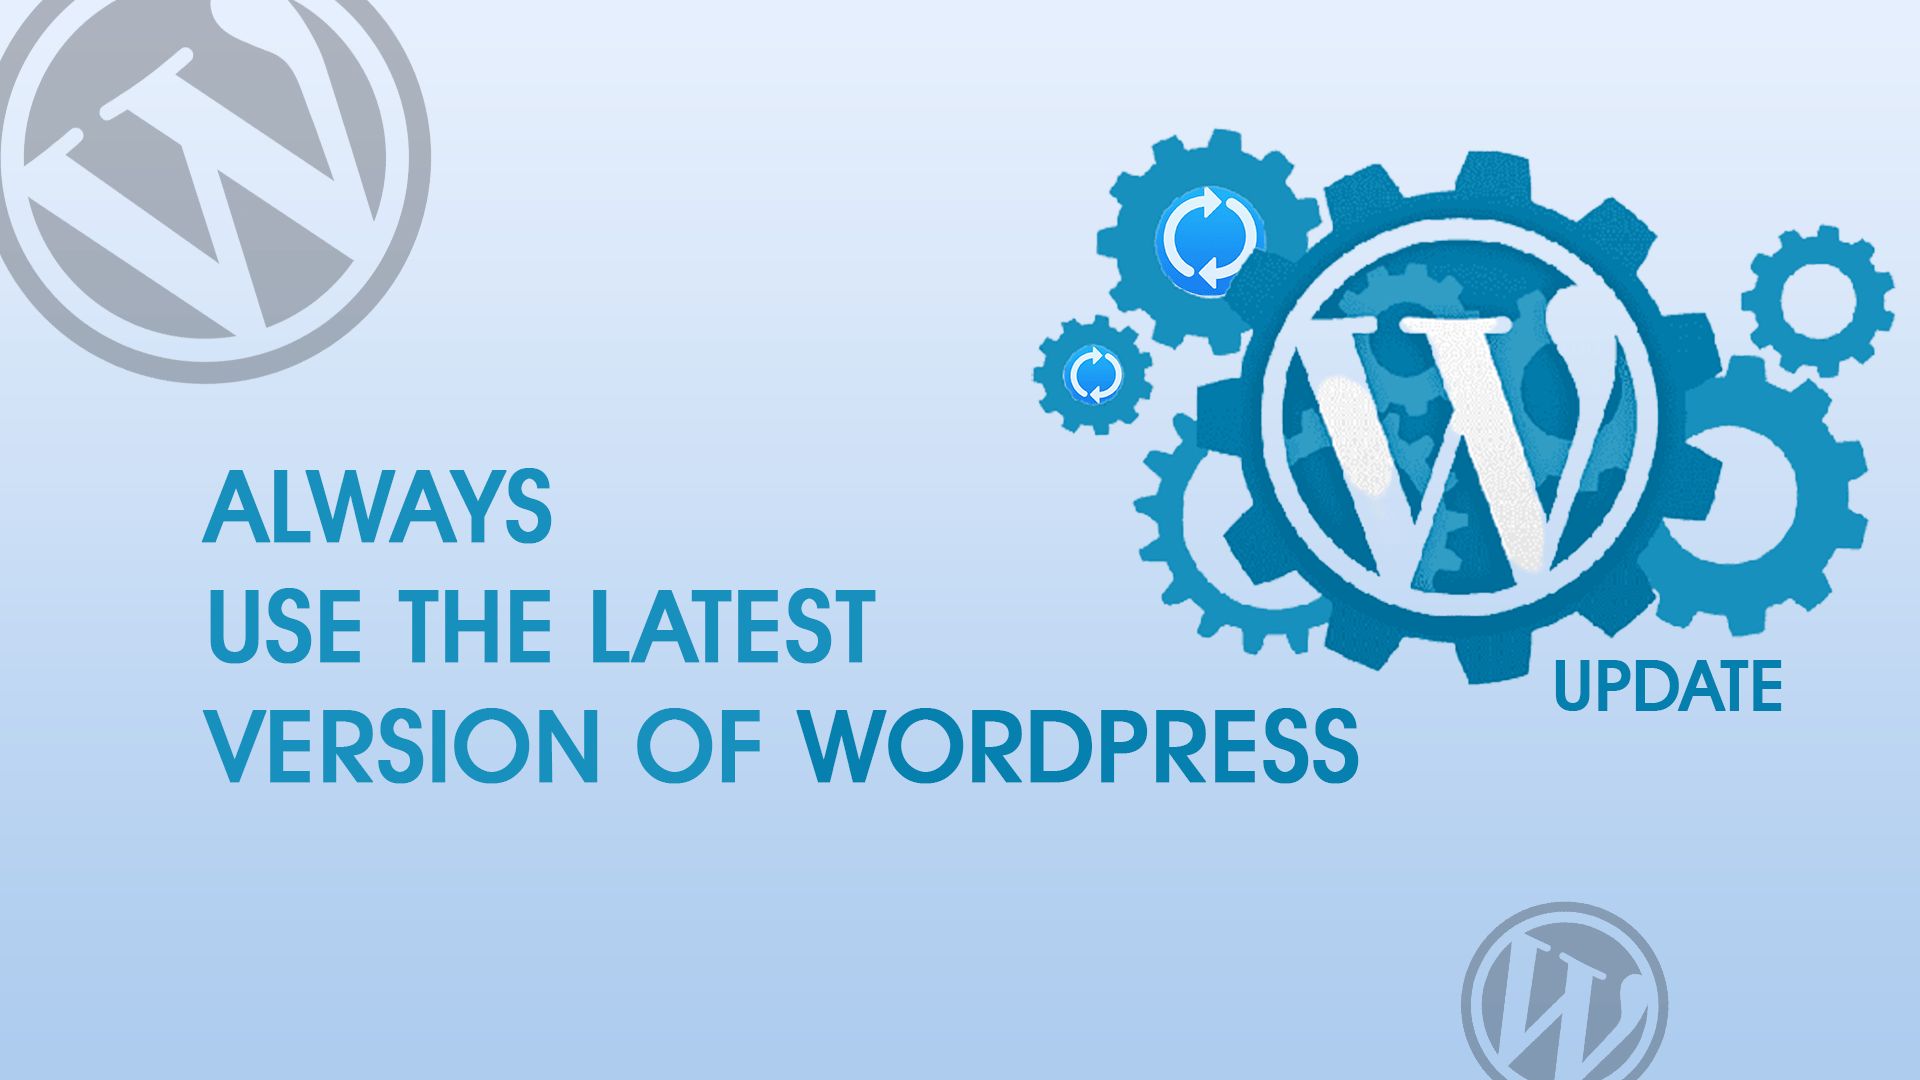 Why You Should Always Use the Latest Version of WordPress